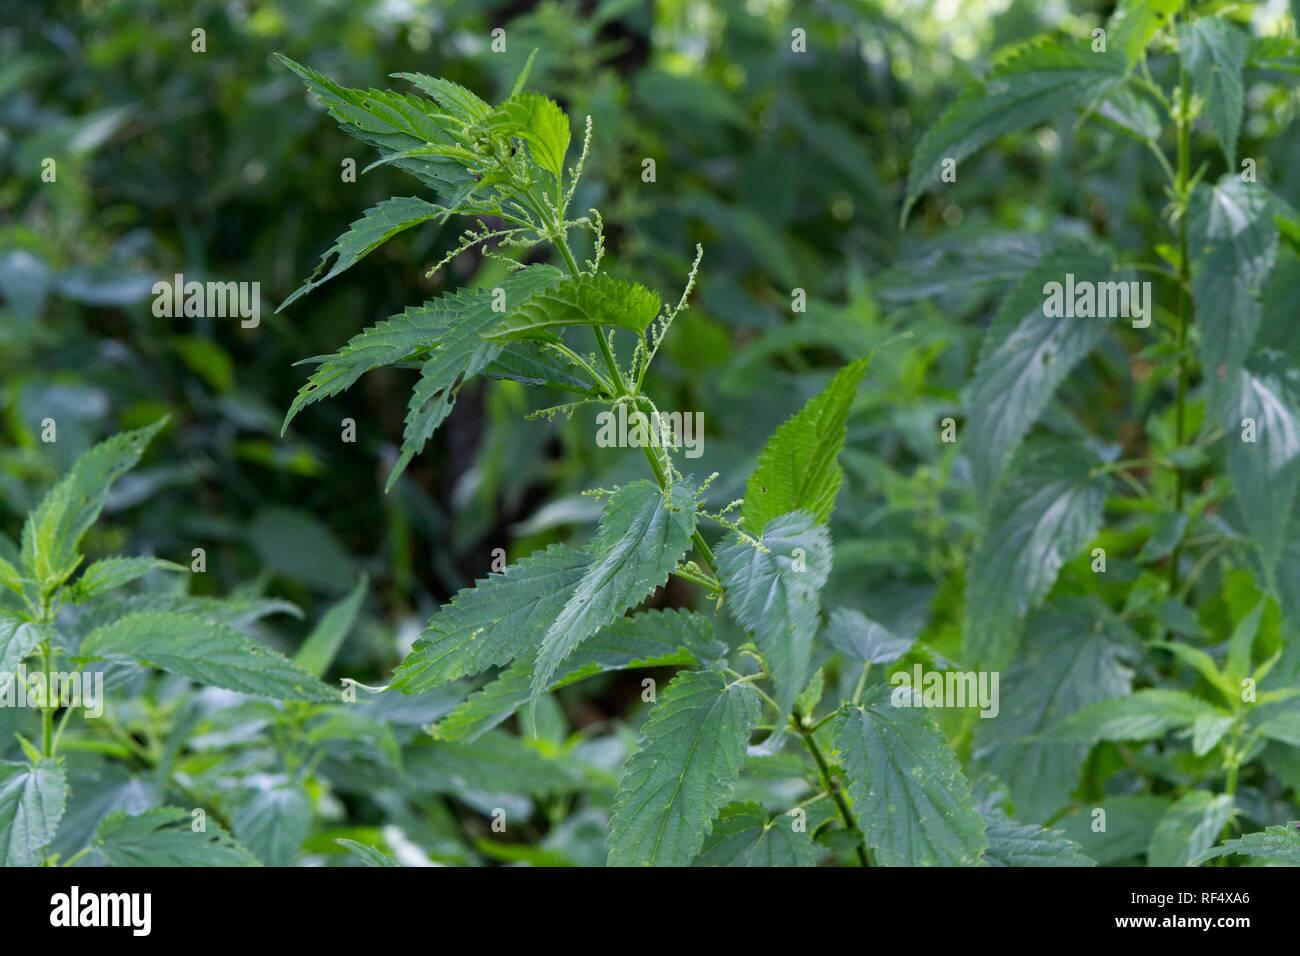 Urtica dioica, often called common nettle or stinging nettle of the family Urticaceae. Stock Photo